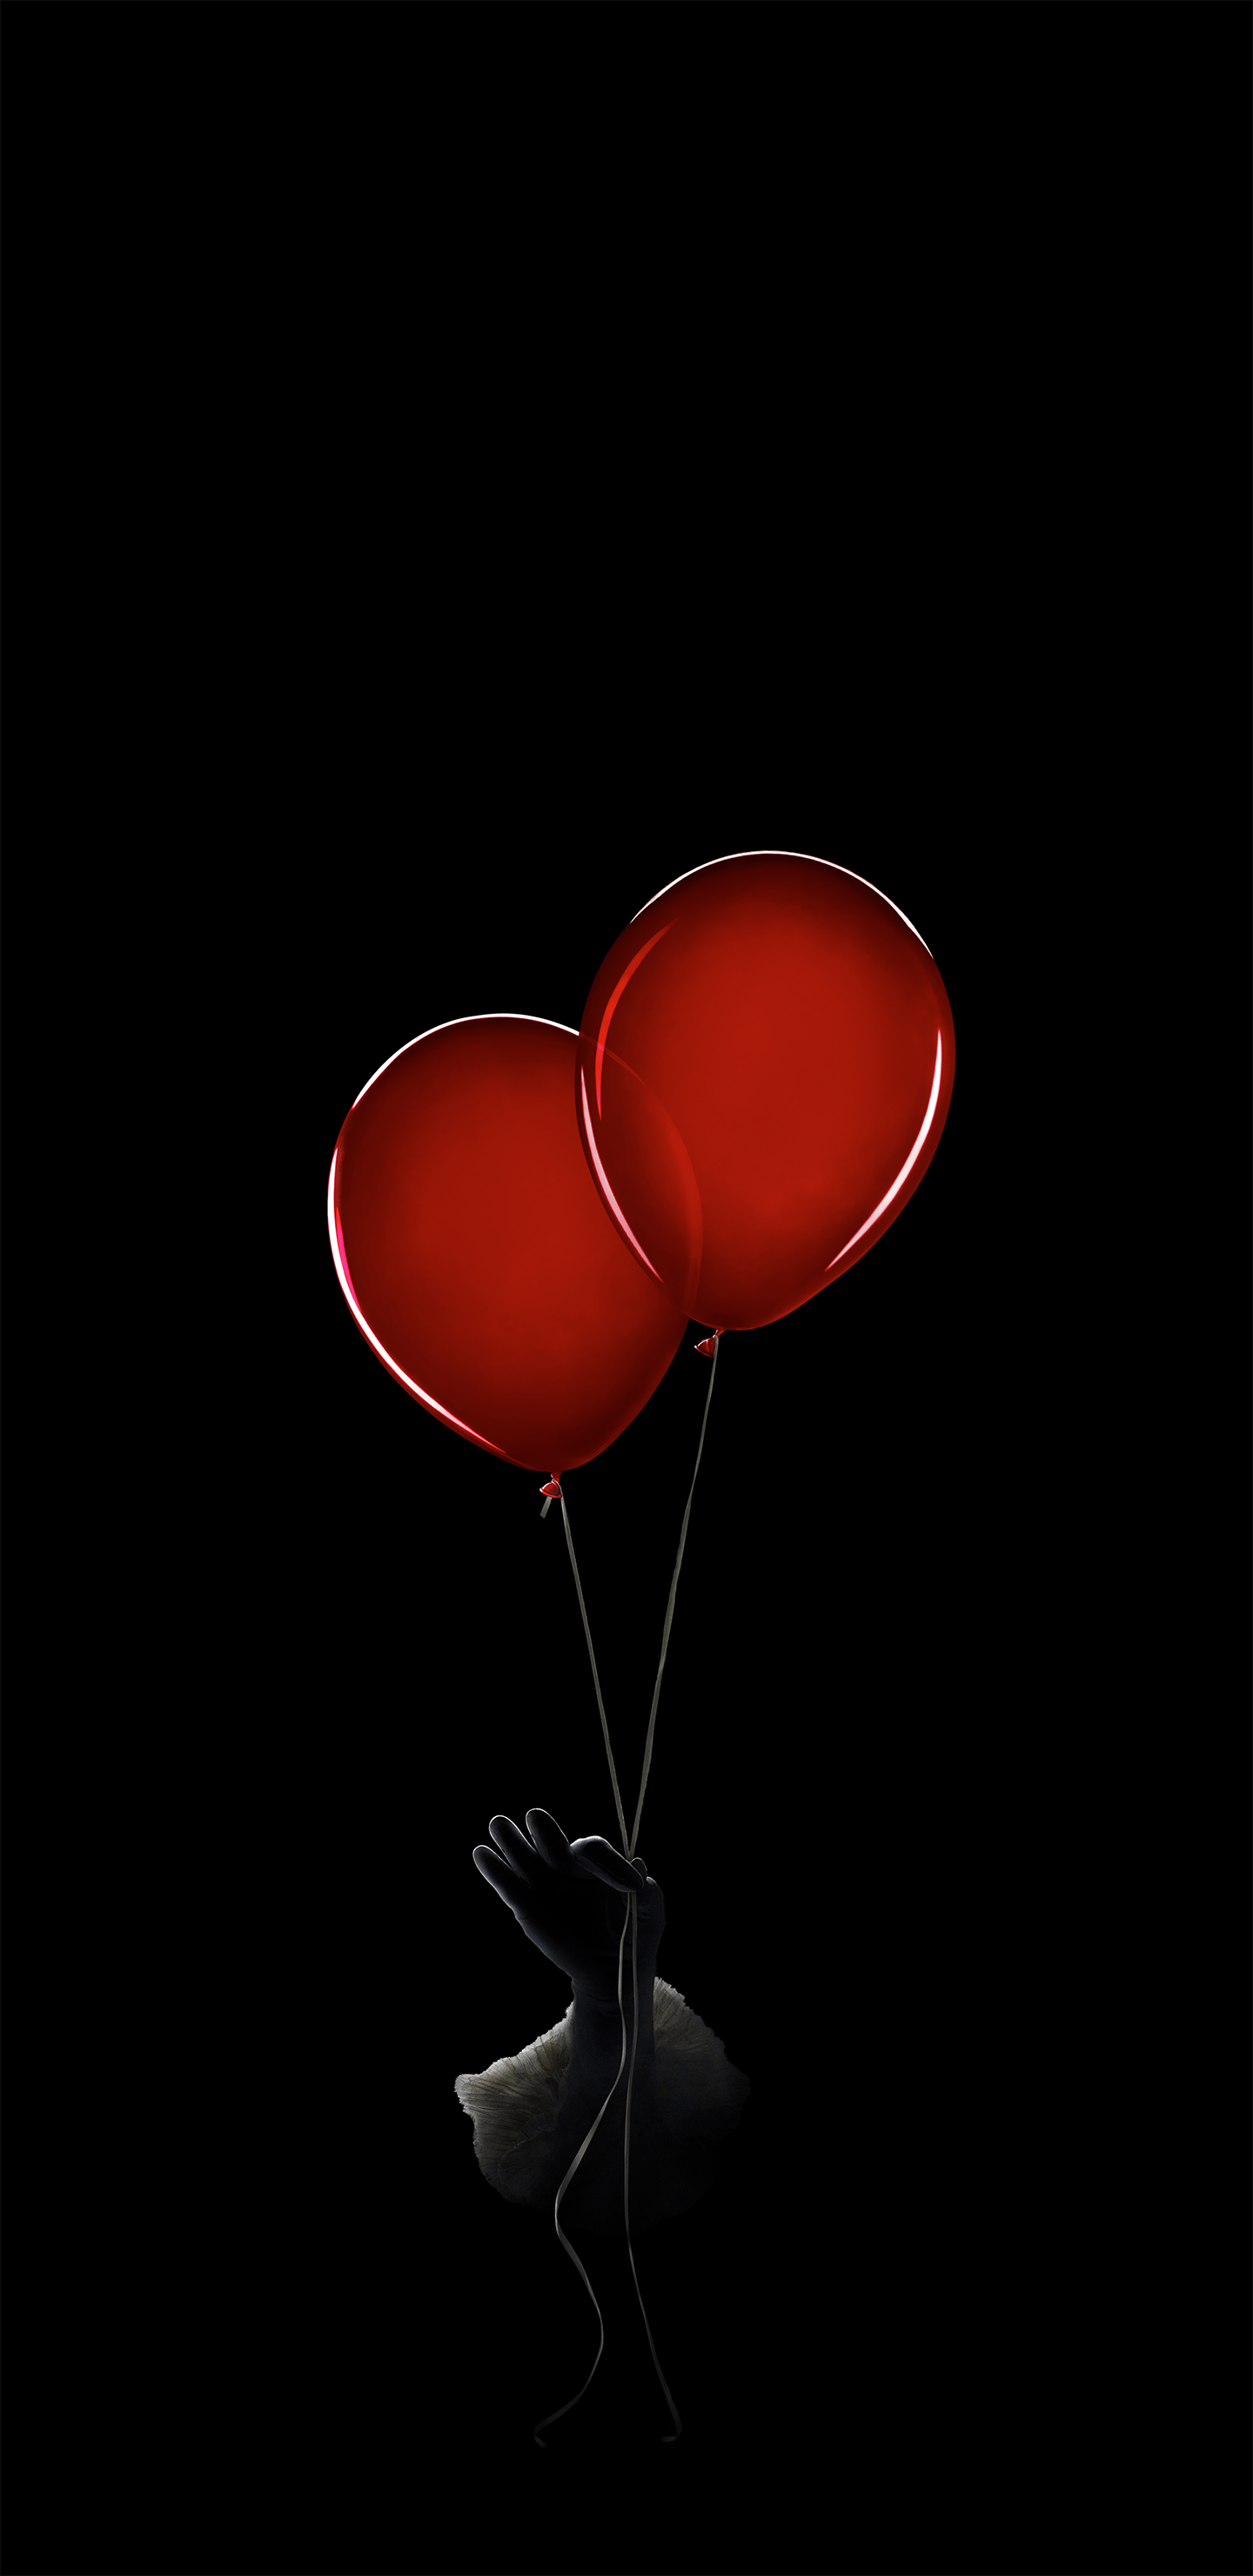 It: Chapter Two [1440x textless AMOLED edit]